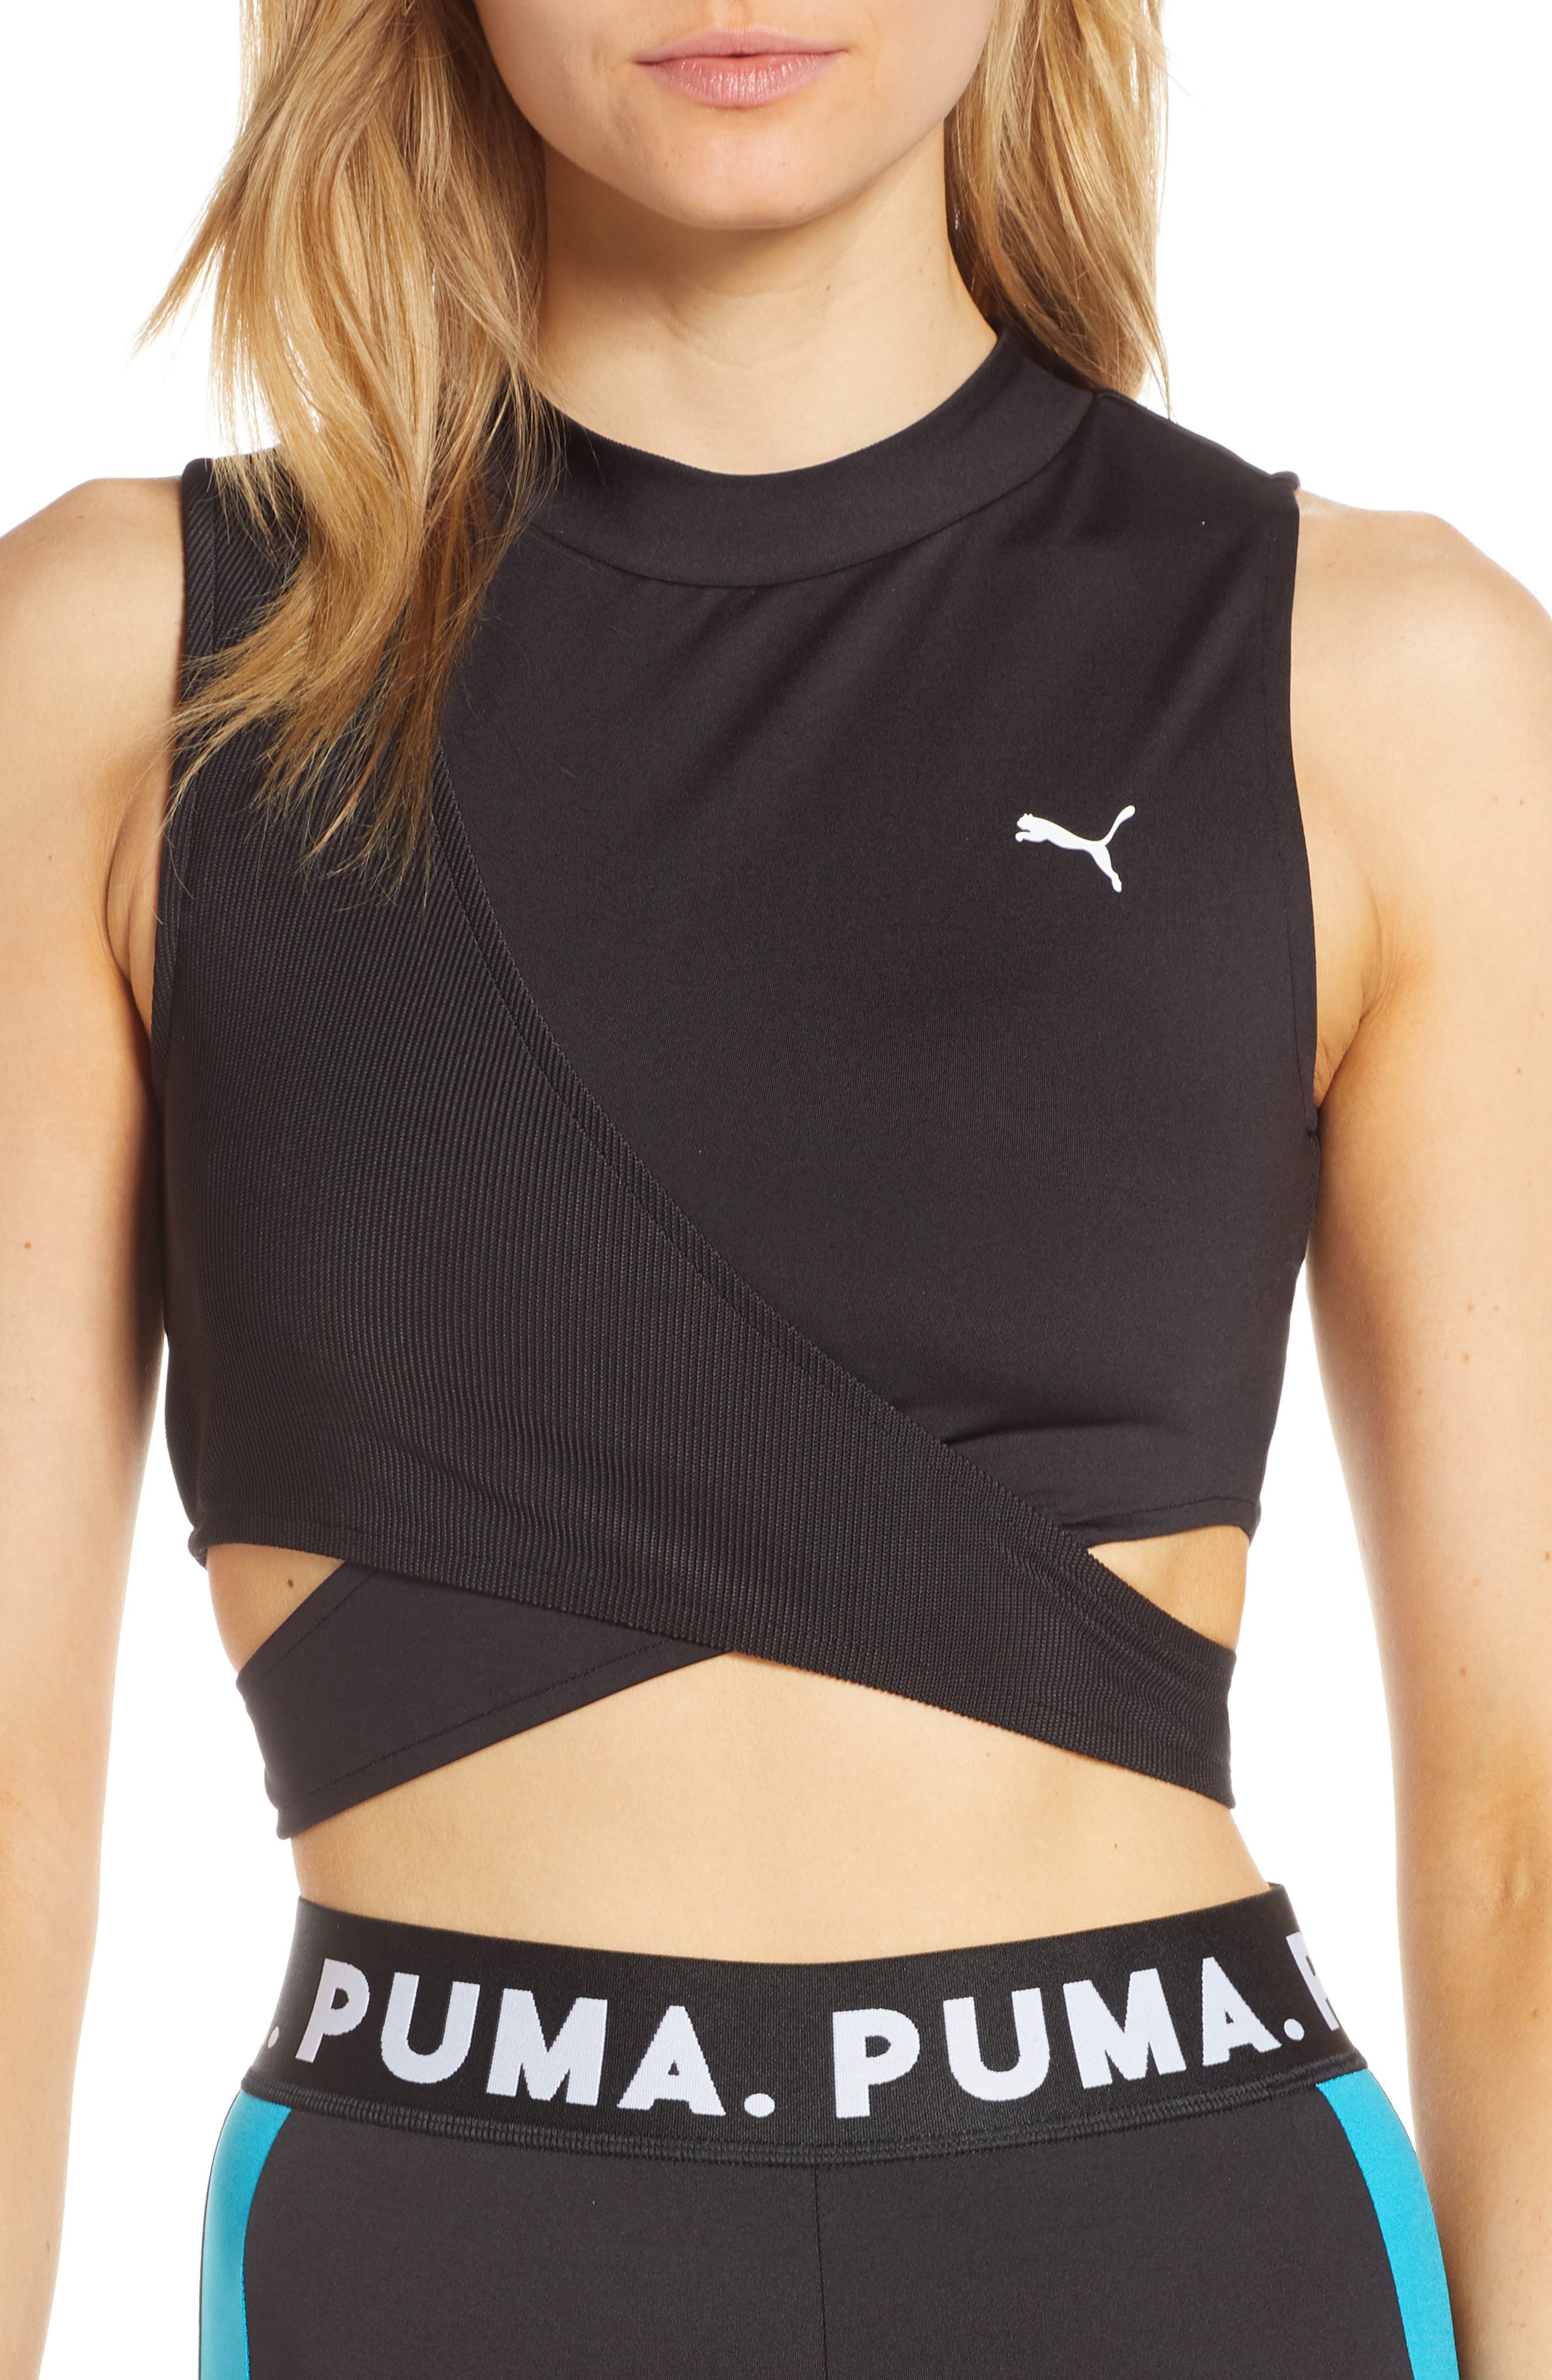 puma chase crossover top